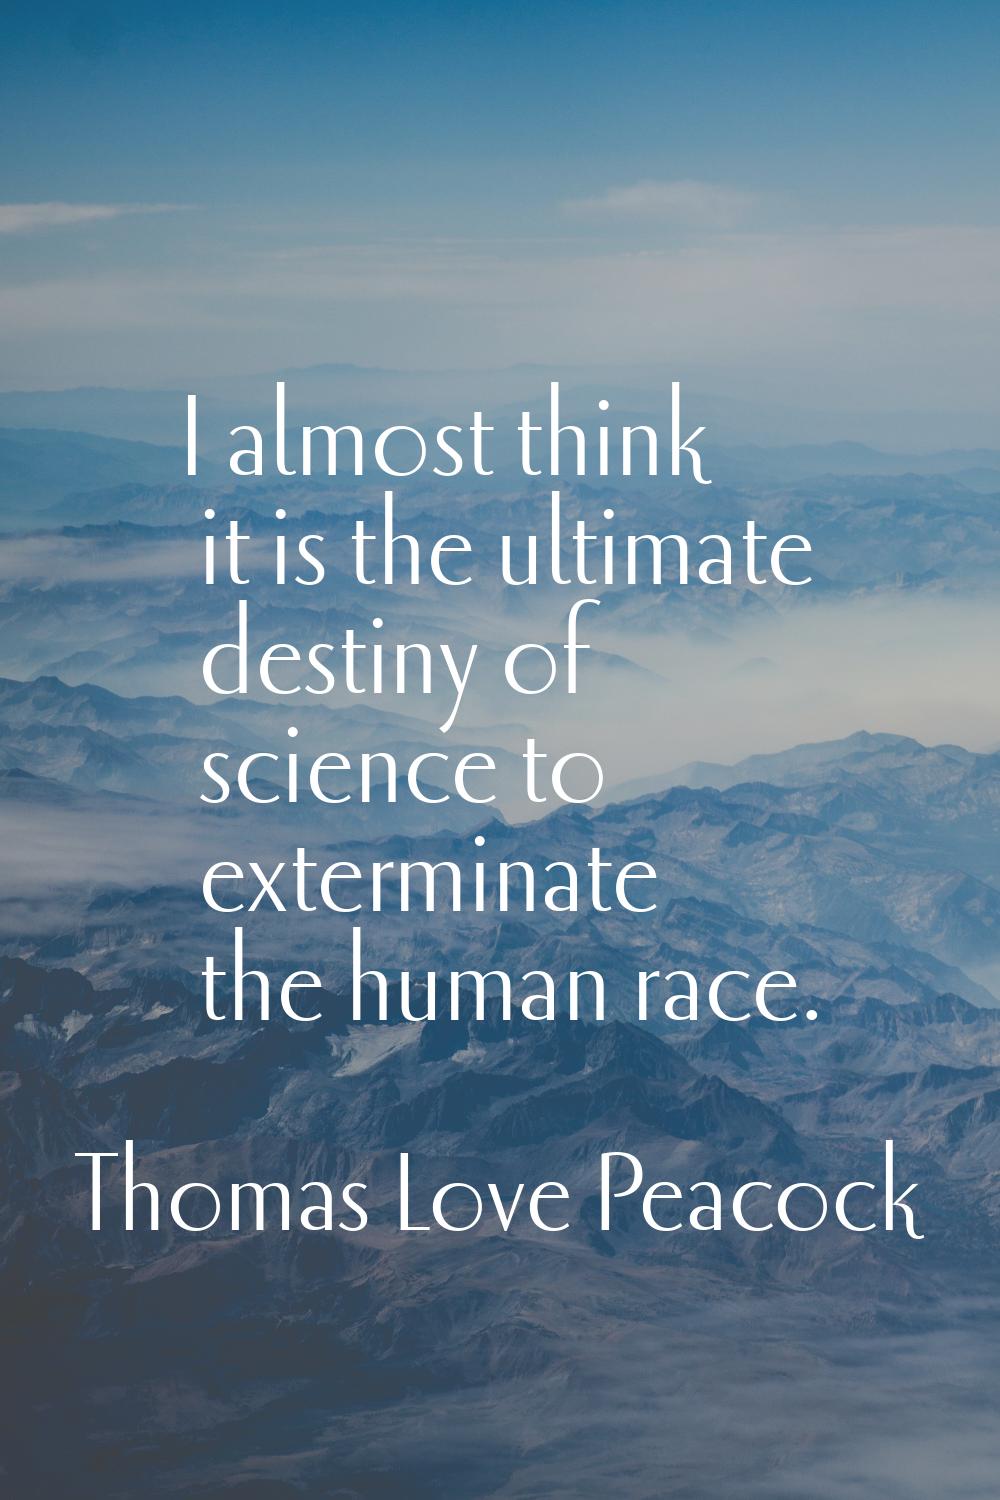 I almost think it is the ultimate destiny of science to exterminate the human race.